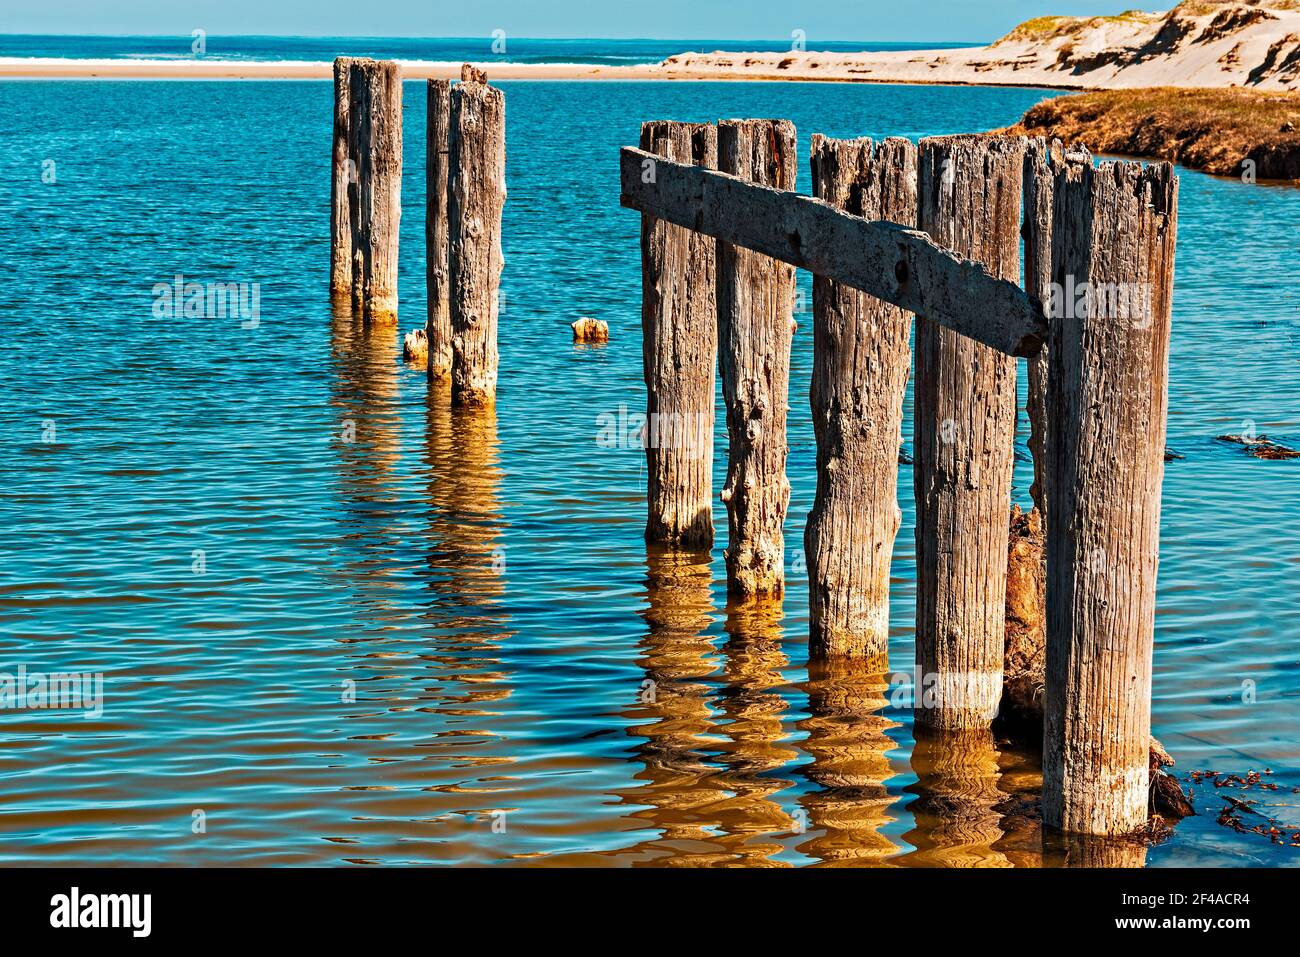 Remains of an old decaying pier in sea with beach beyond Stock Photo